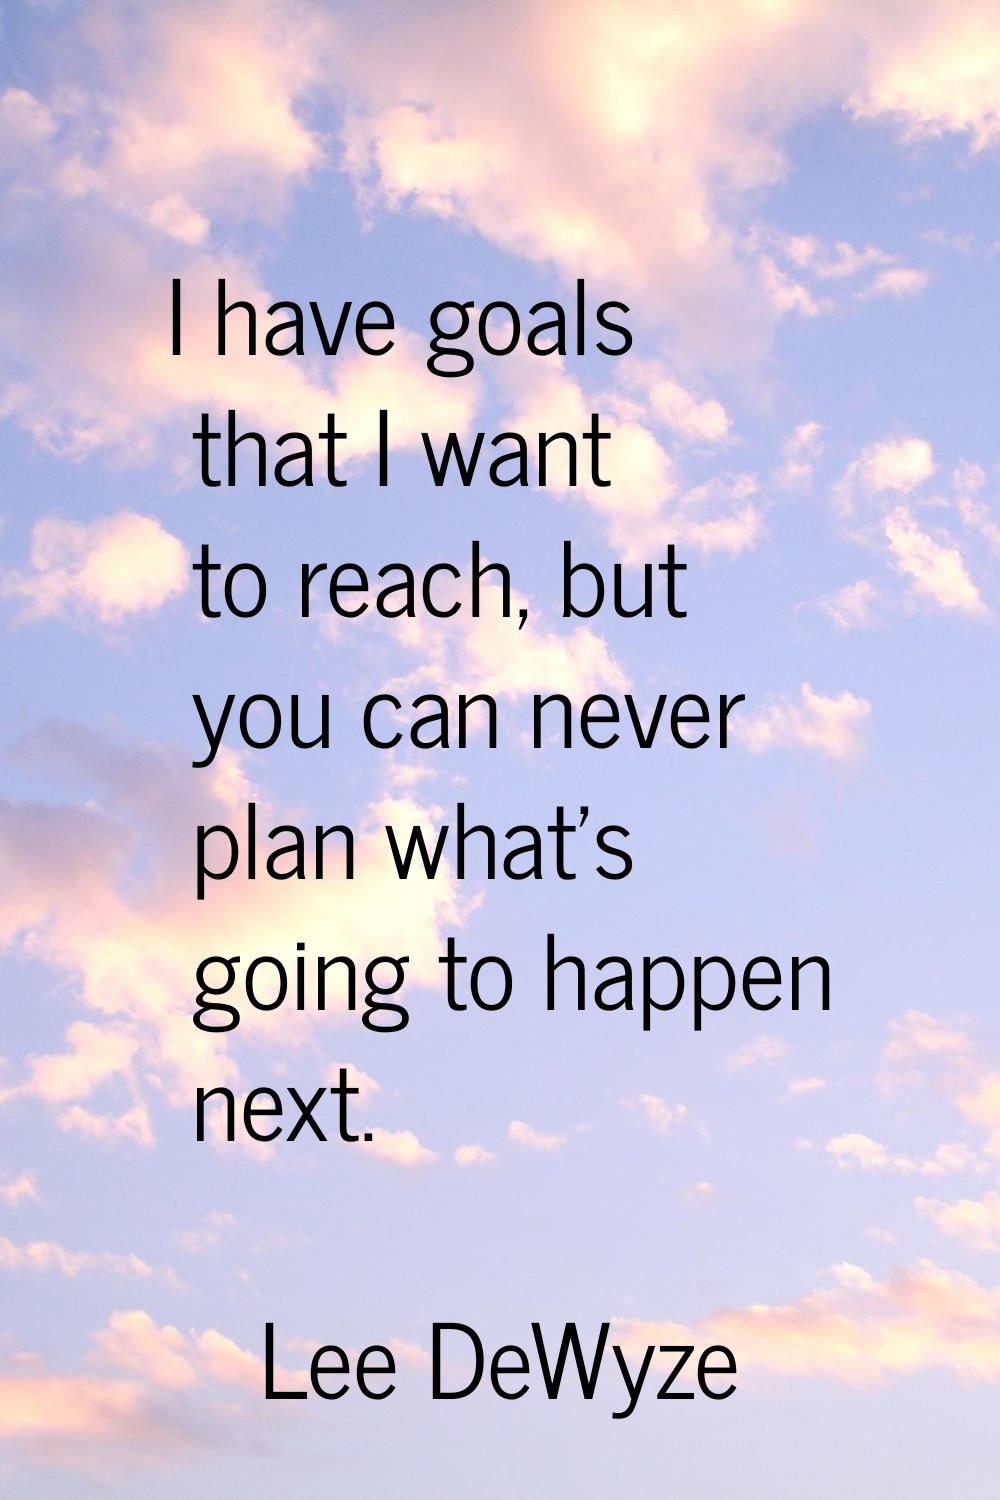 I have goals that I want to reach, but you can never plan what's going to happen next.